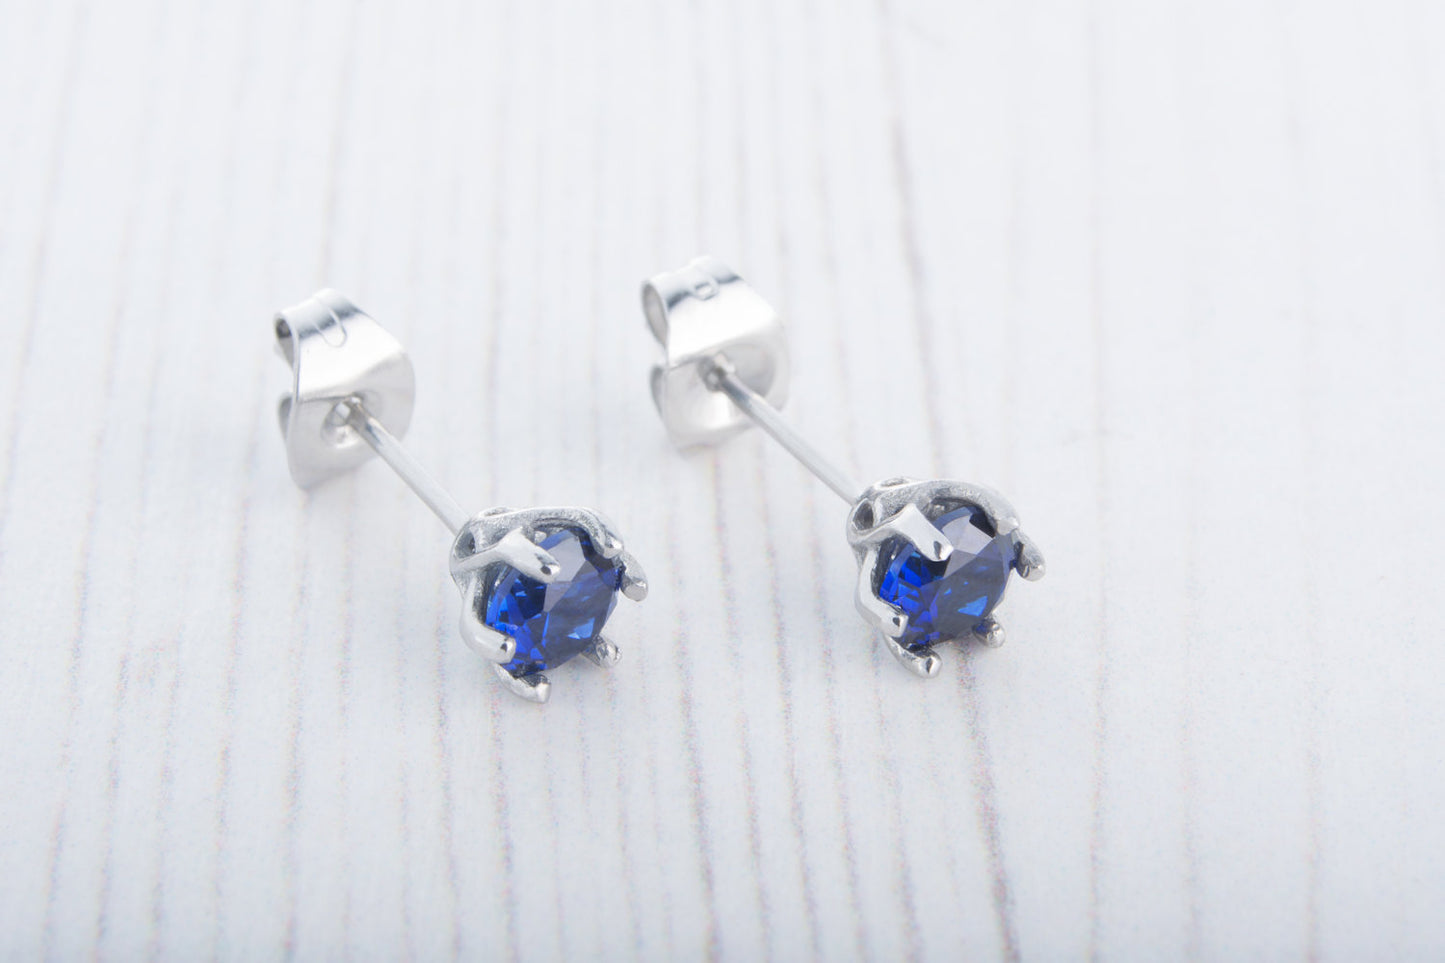 Lab Blue Sapphire stud earrings, available in titanium, white gold and surgical steel 4mm, 5mm, 6mm sizes